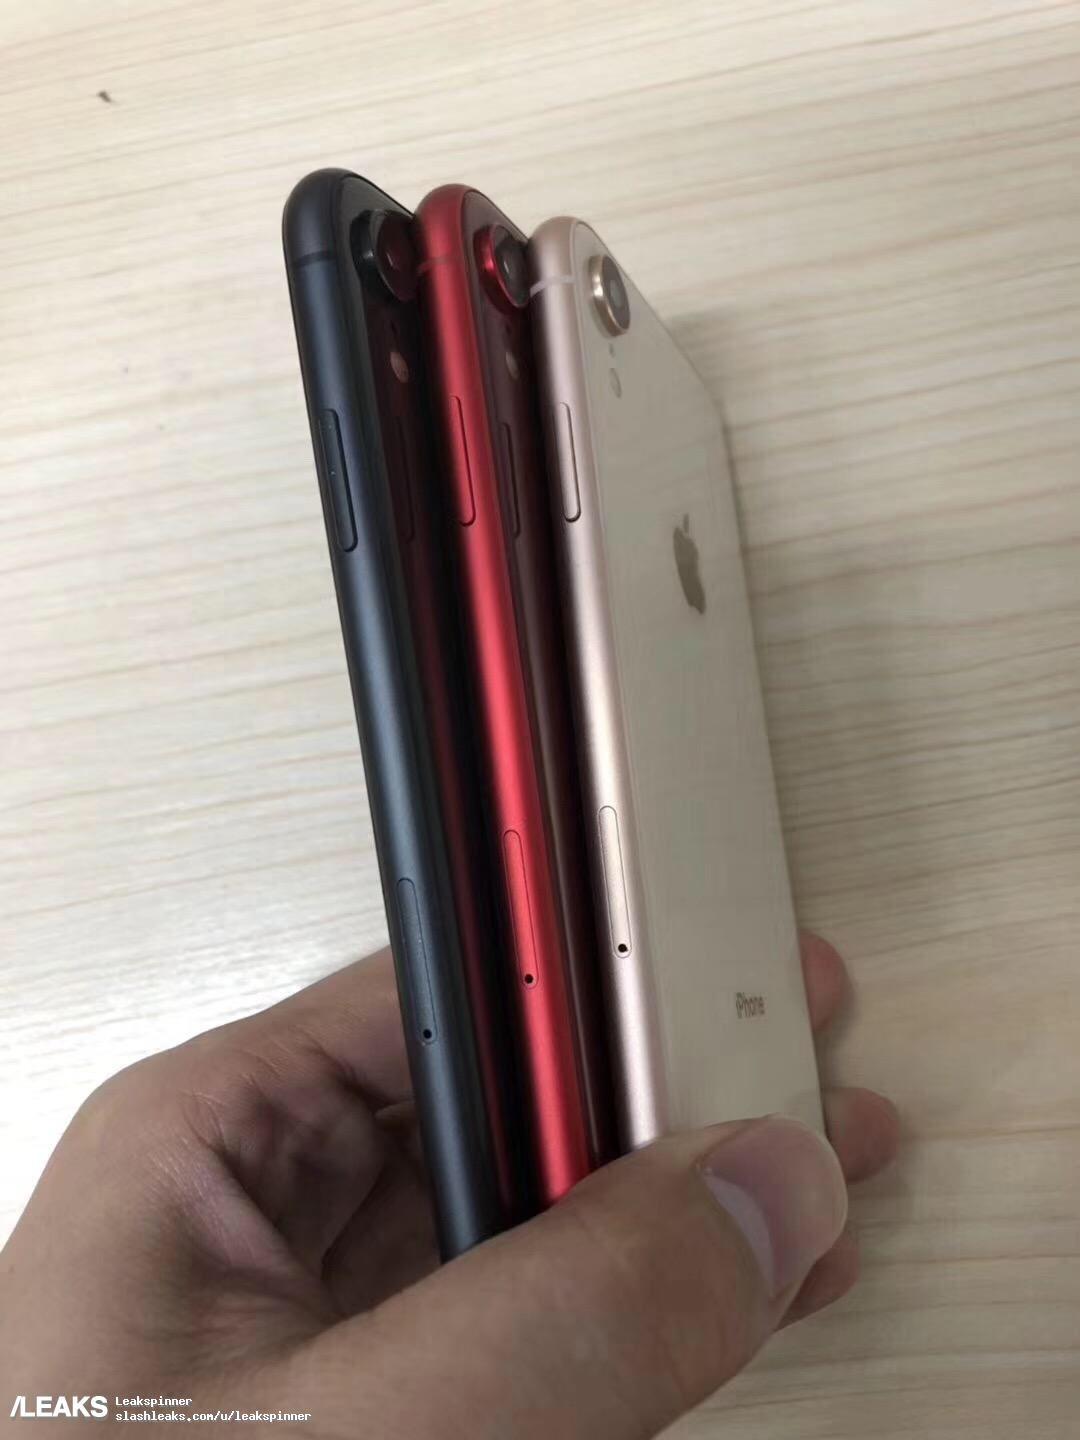 Iphone Xc 6 1 Inch Lcd Might Have A Nasty Surprise Slashgear